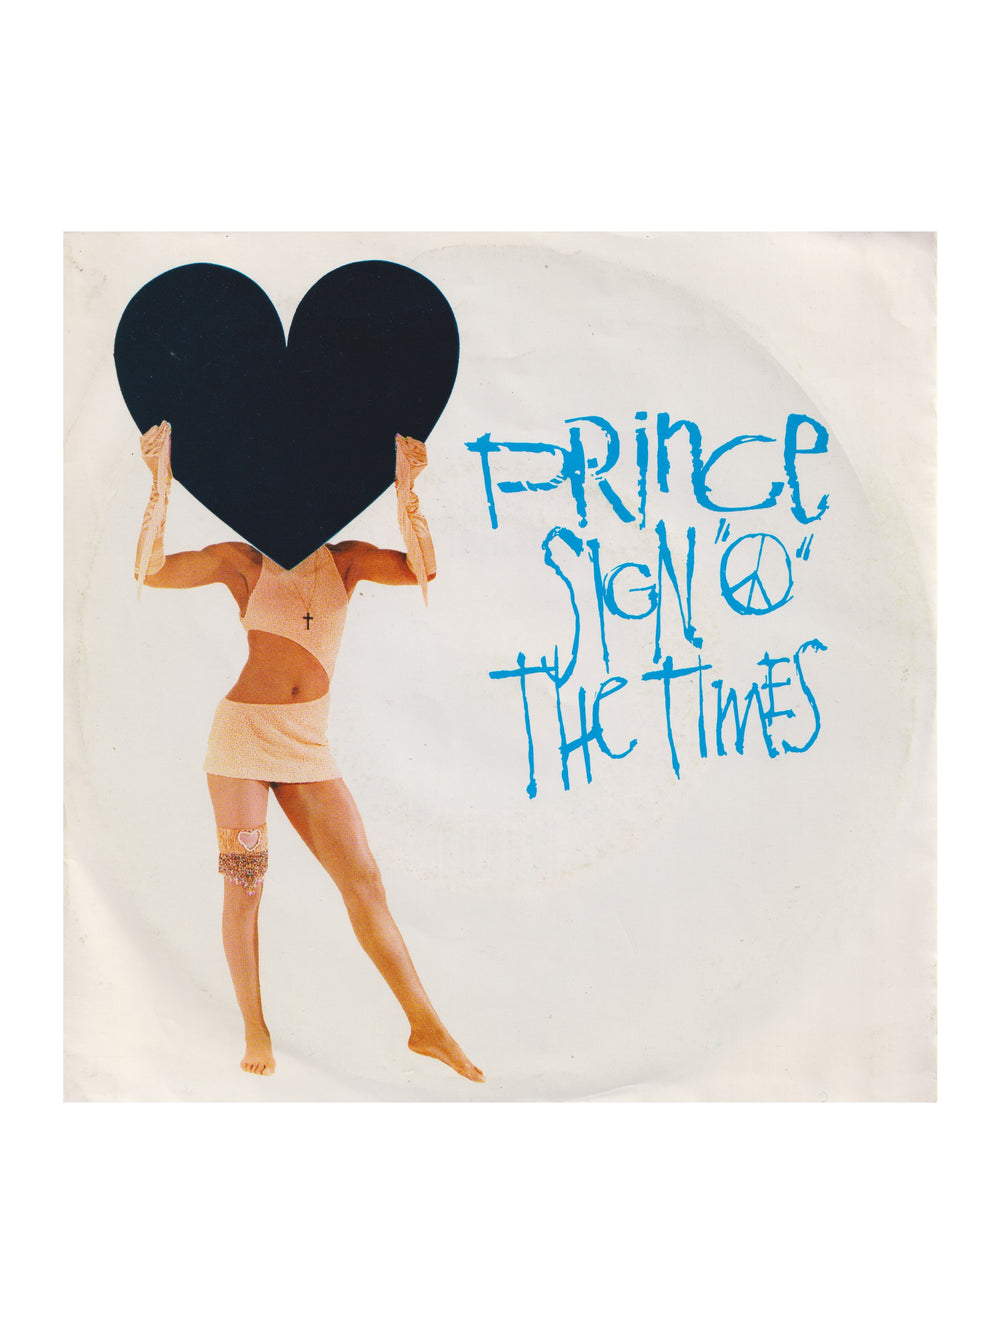 Prince – Sign "O" The Times Vinyl 7" Single Europe / Germany Preloved: 1987